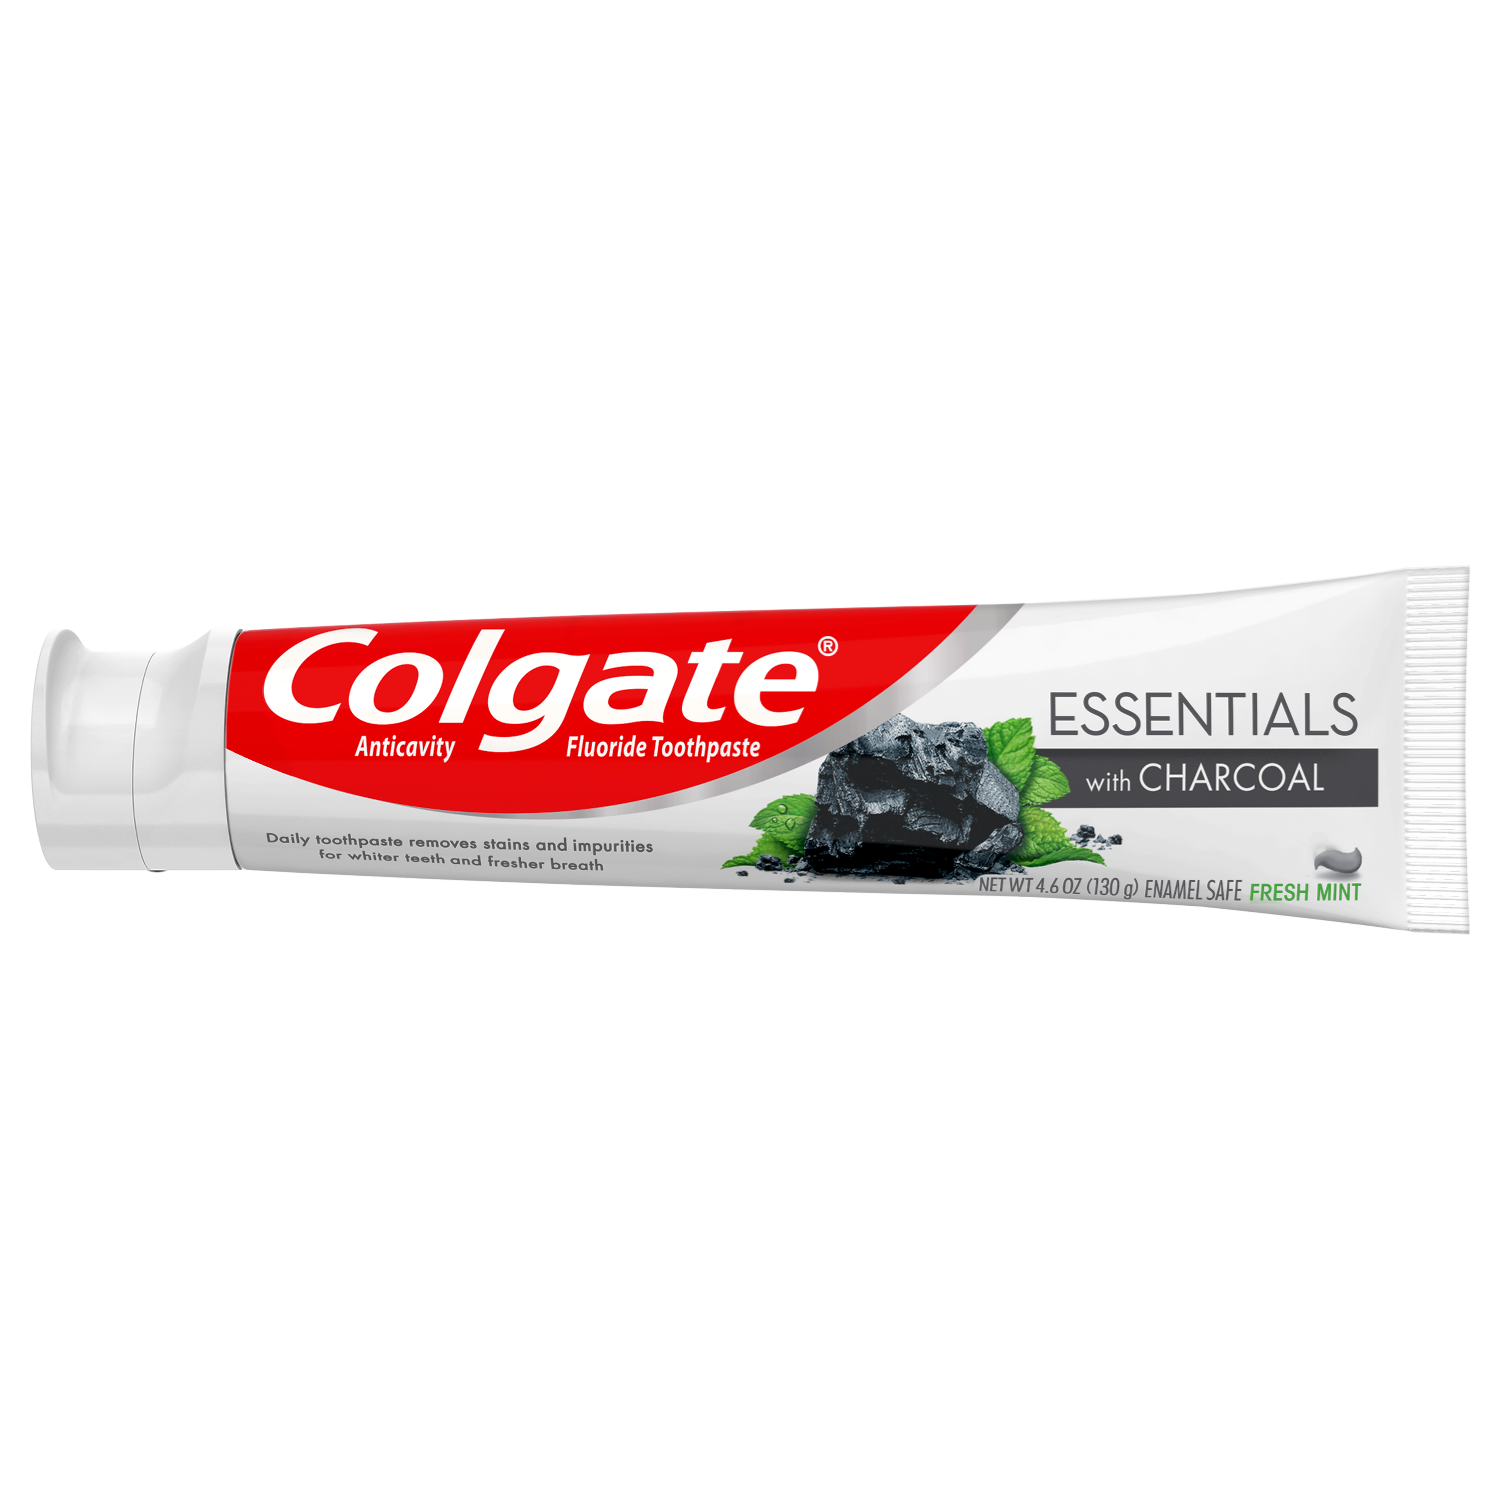 Colgate Charcoal Teeth Whitening Toothpaste, Fresh Mint, 4.6 oz - image 2 of 9